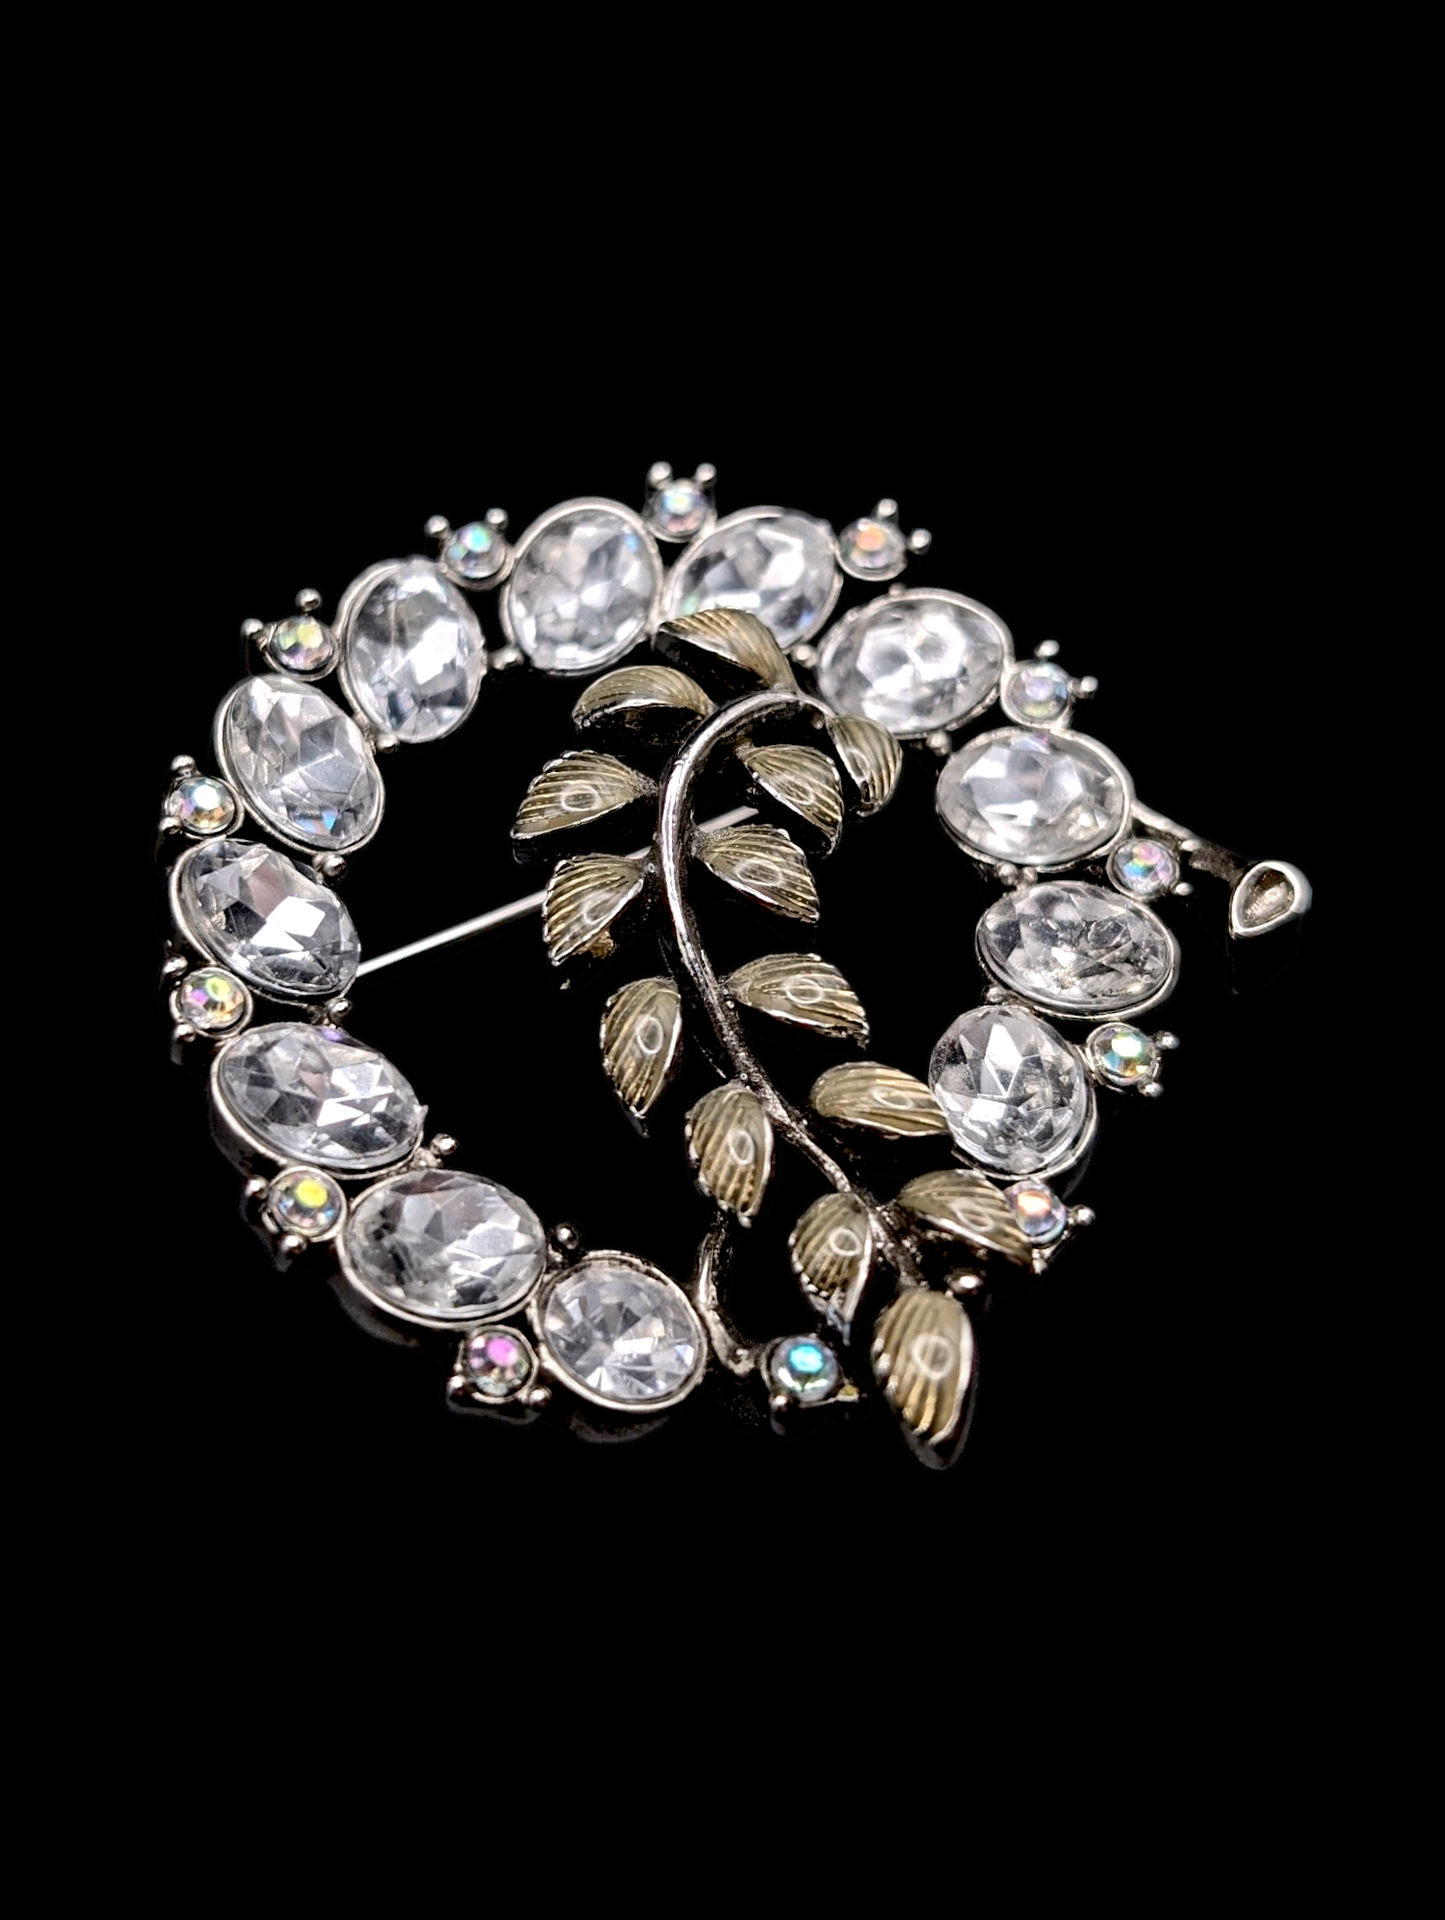 1950s - 1970s Monet Crystal Rhinestone, Aurora Borealis and Enamel Leaf Wreath Brooch Pin in Silver and Olive Green